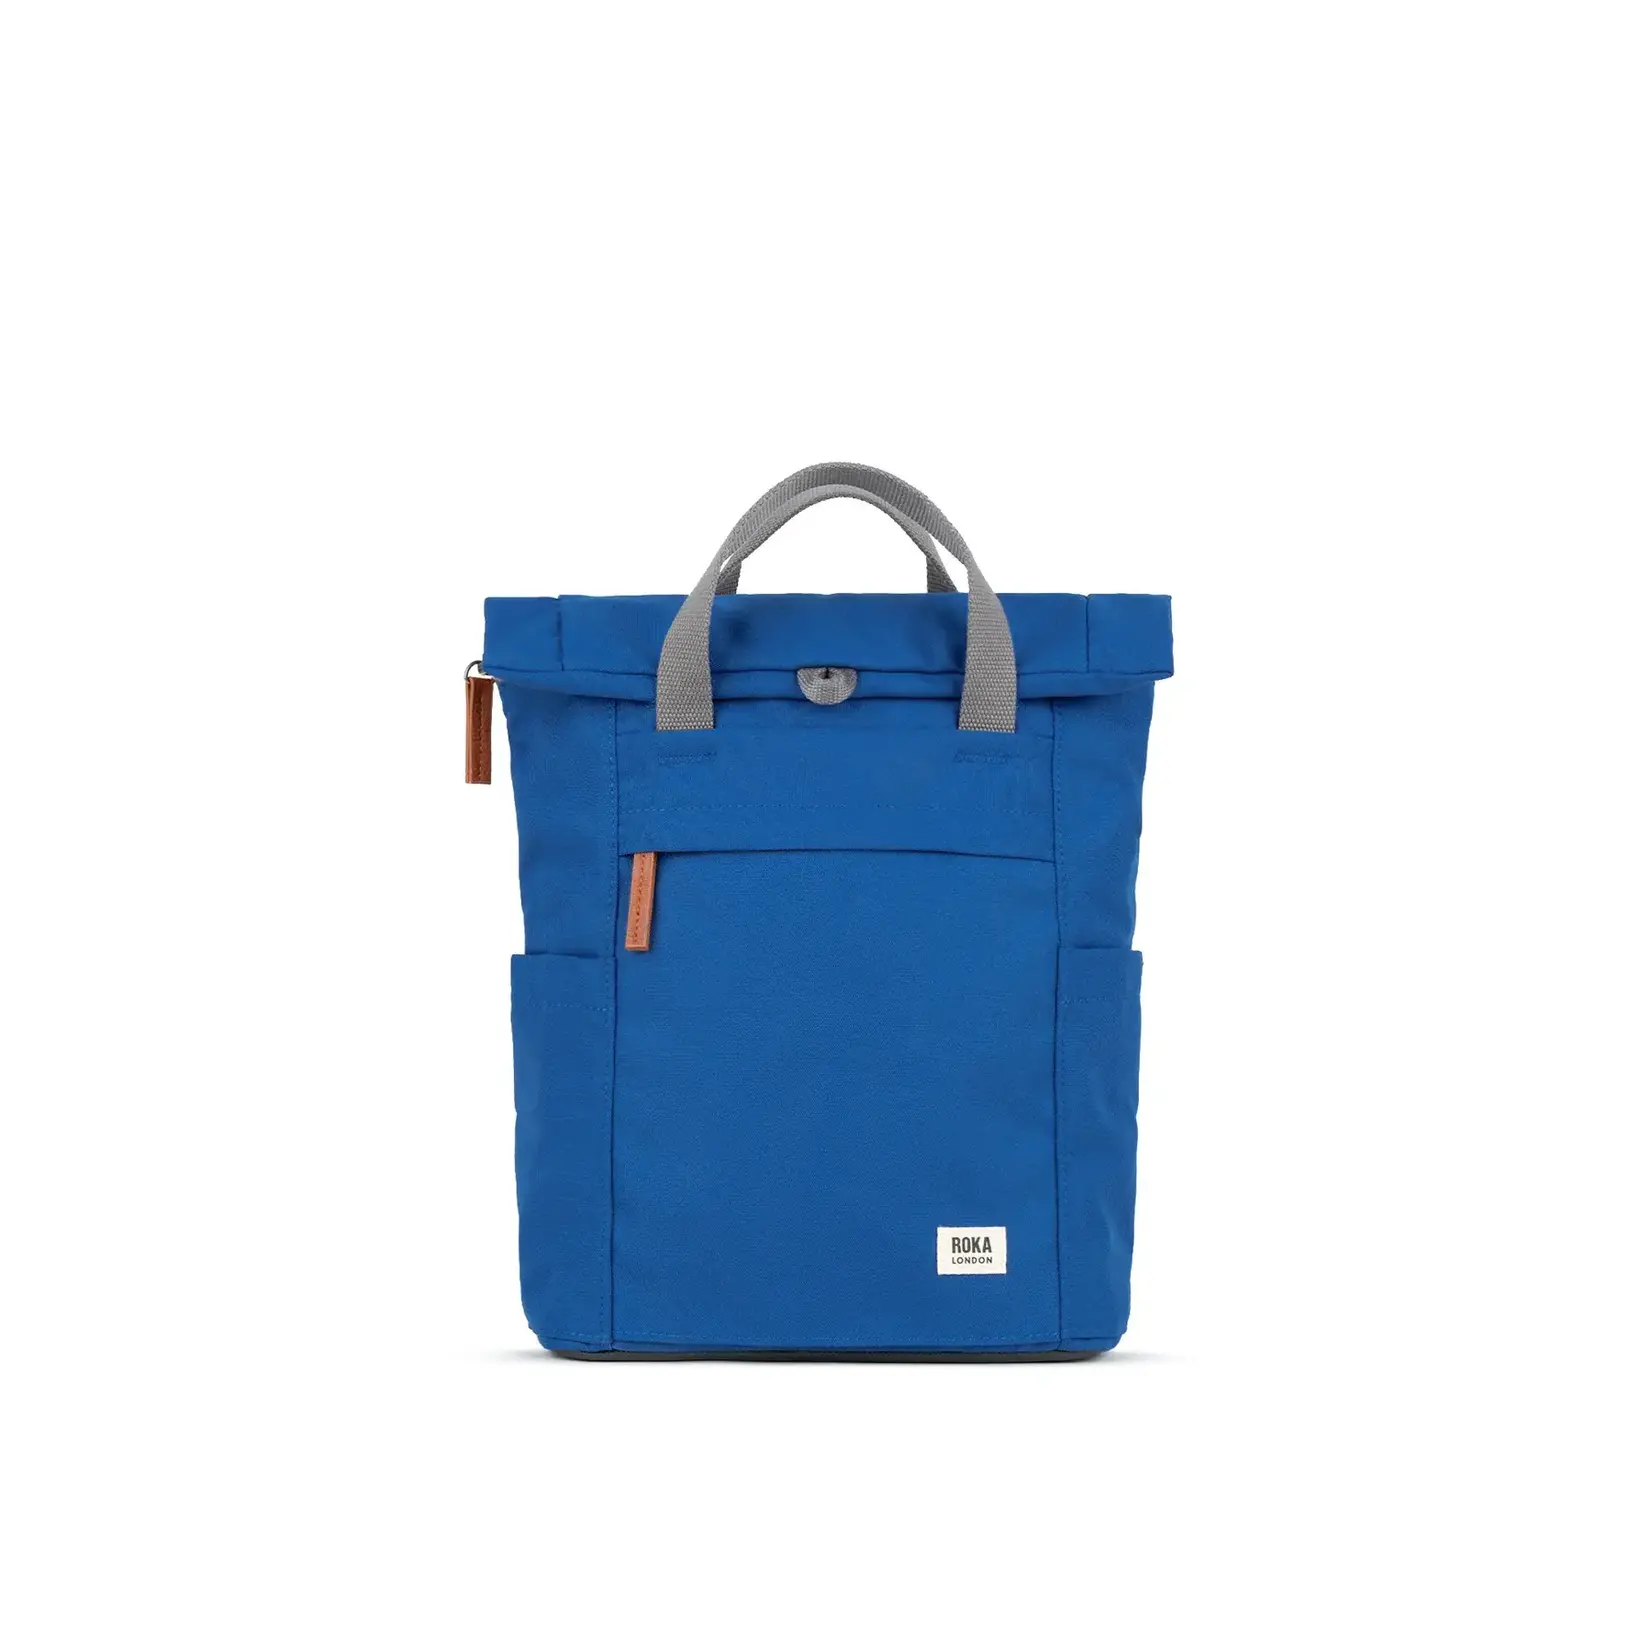 ROKA London Finchley A Galactic Blue Recycled Canvas12-15 recycled bottles Small